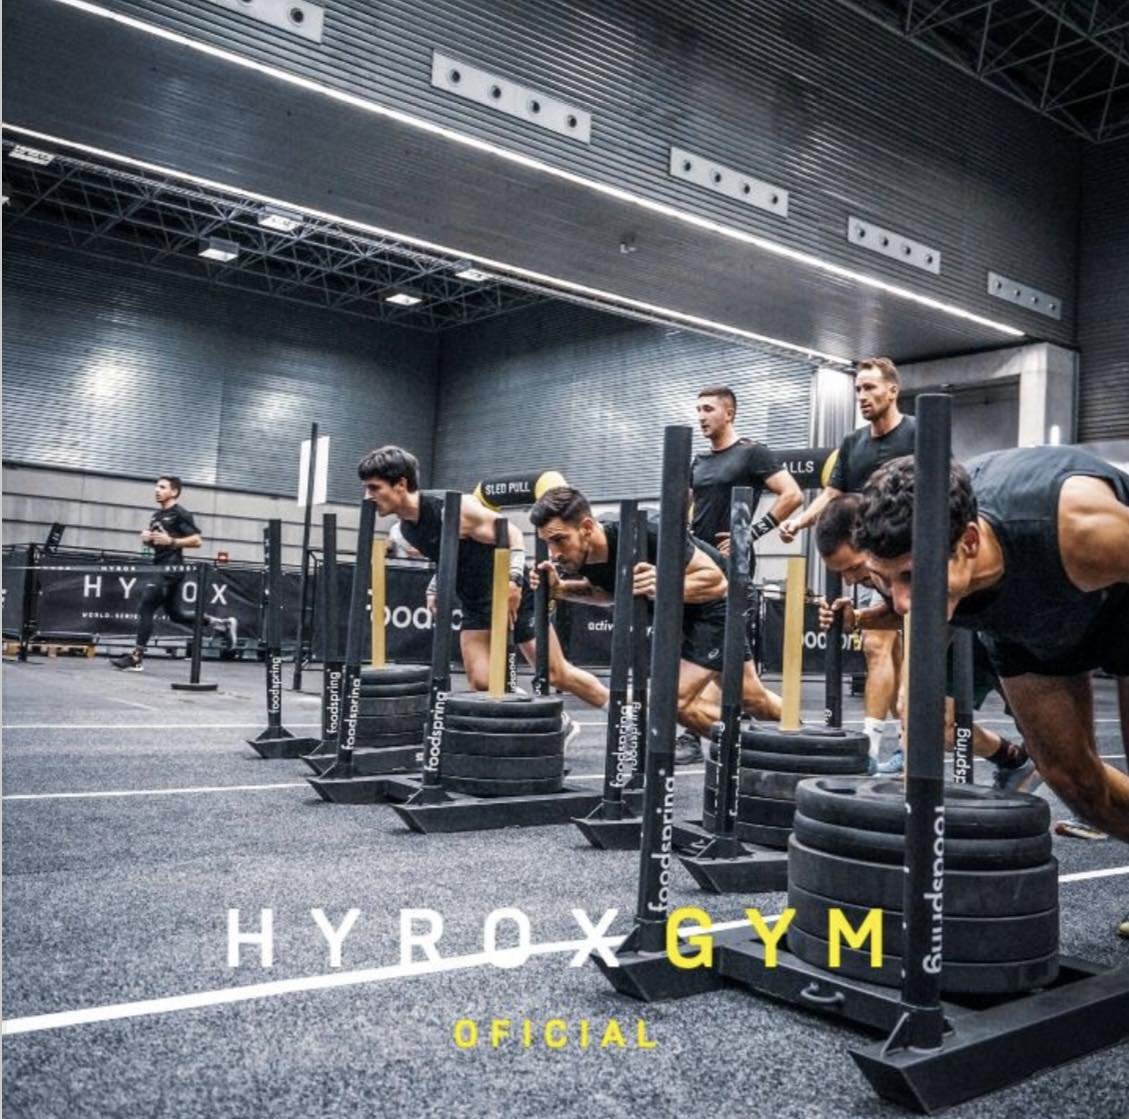 📣 We have news! 

We are so excited to announce that Feathers Fitness have now partnered with HYROX and are an official affiliate, offering tailored Fitness Programs for anyone interested in HYROX Fitness Racing!

The HYROX RACE combines both runnin